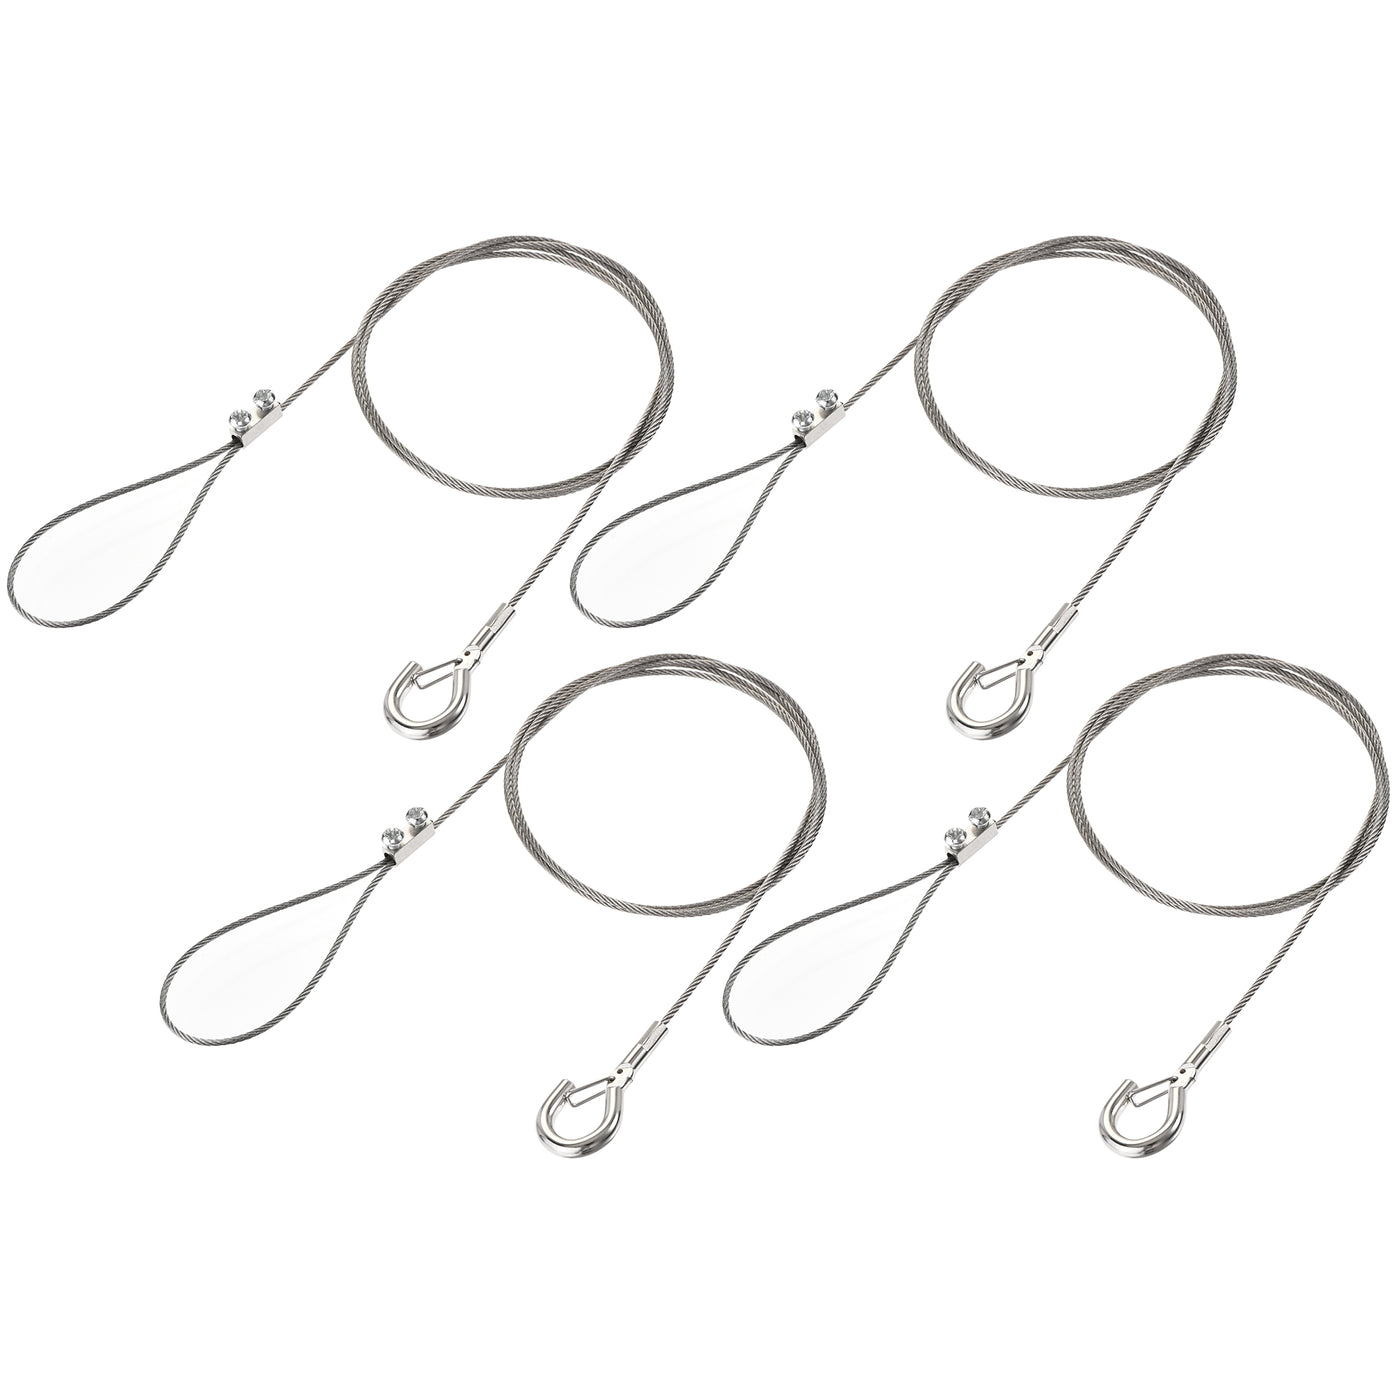 uxcell Uxcell Picture Hanging Wire Kit, 4Set 1M Adjustable Hanger Wire Hook for Home Art Gallery Picture Kit, Load 66 lbs, with Vertical Fixing Screws